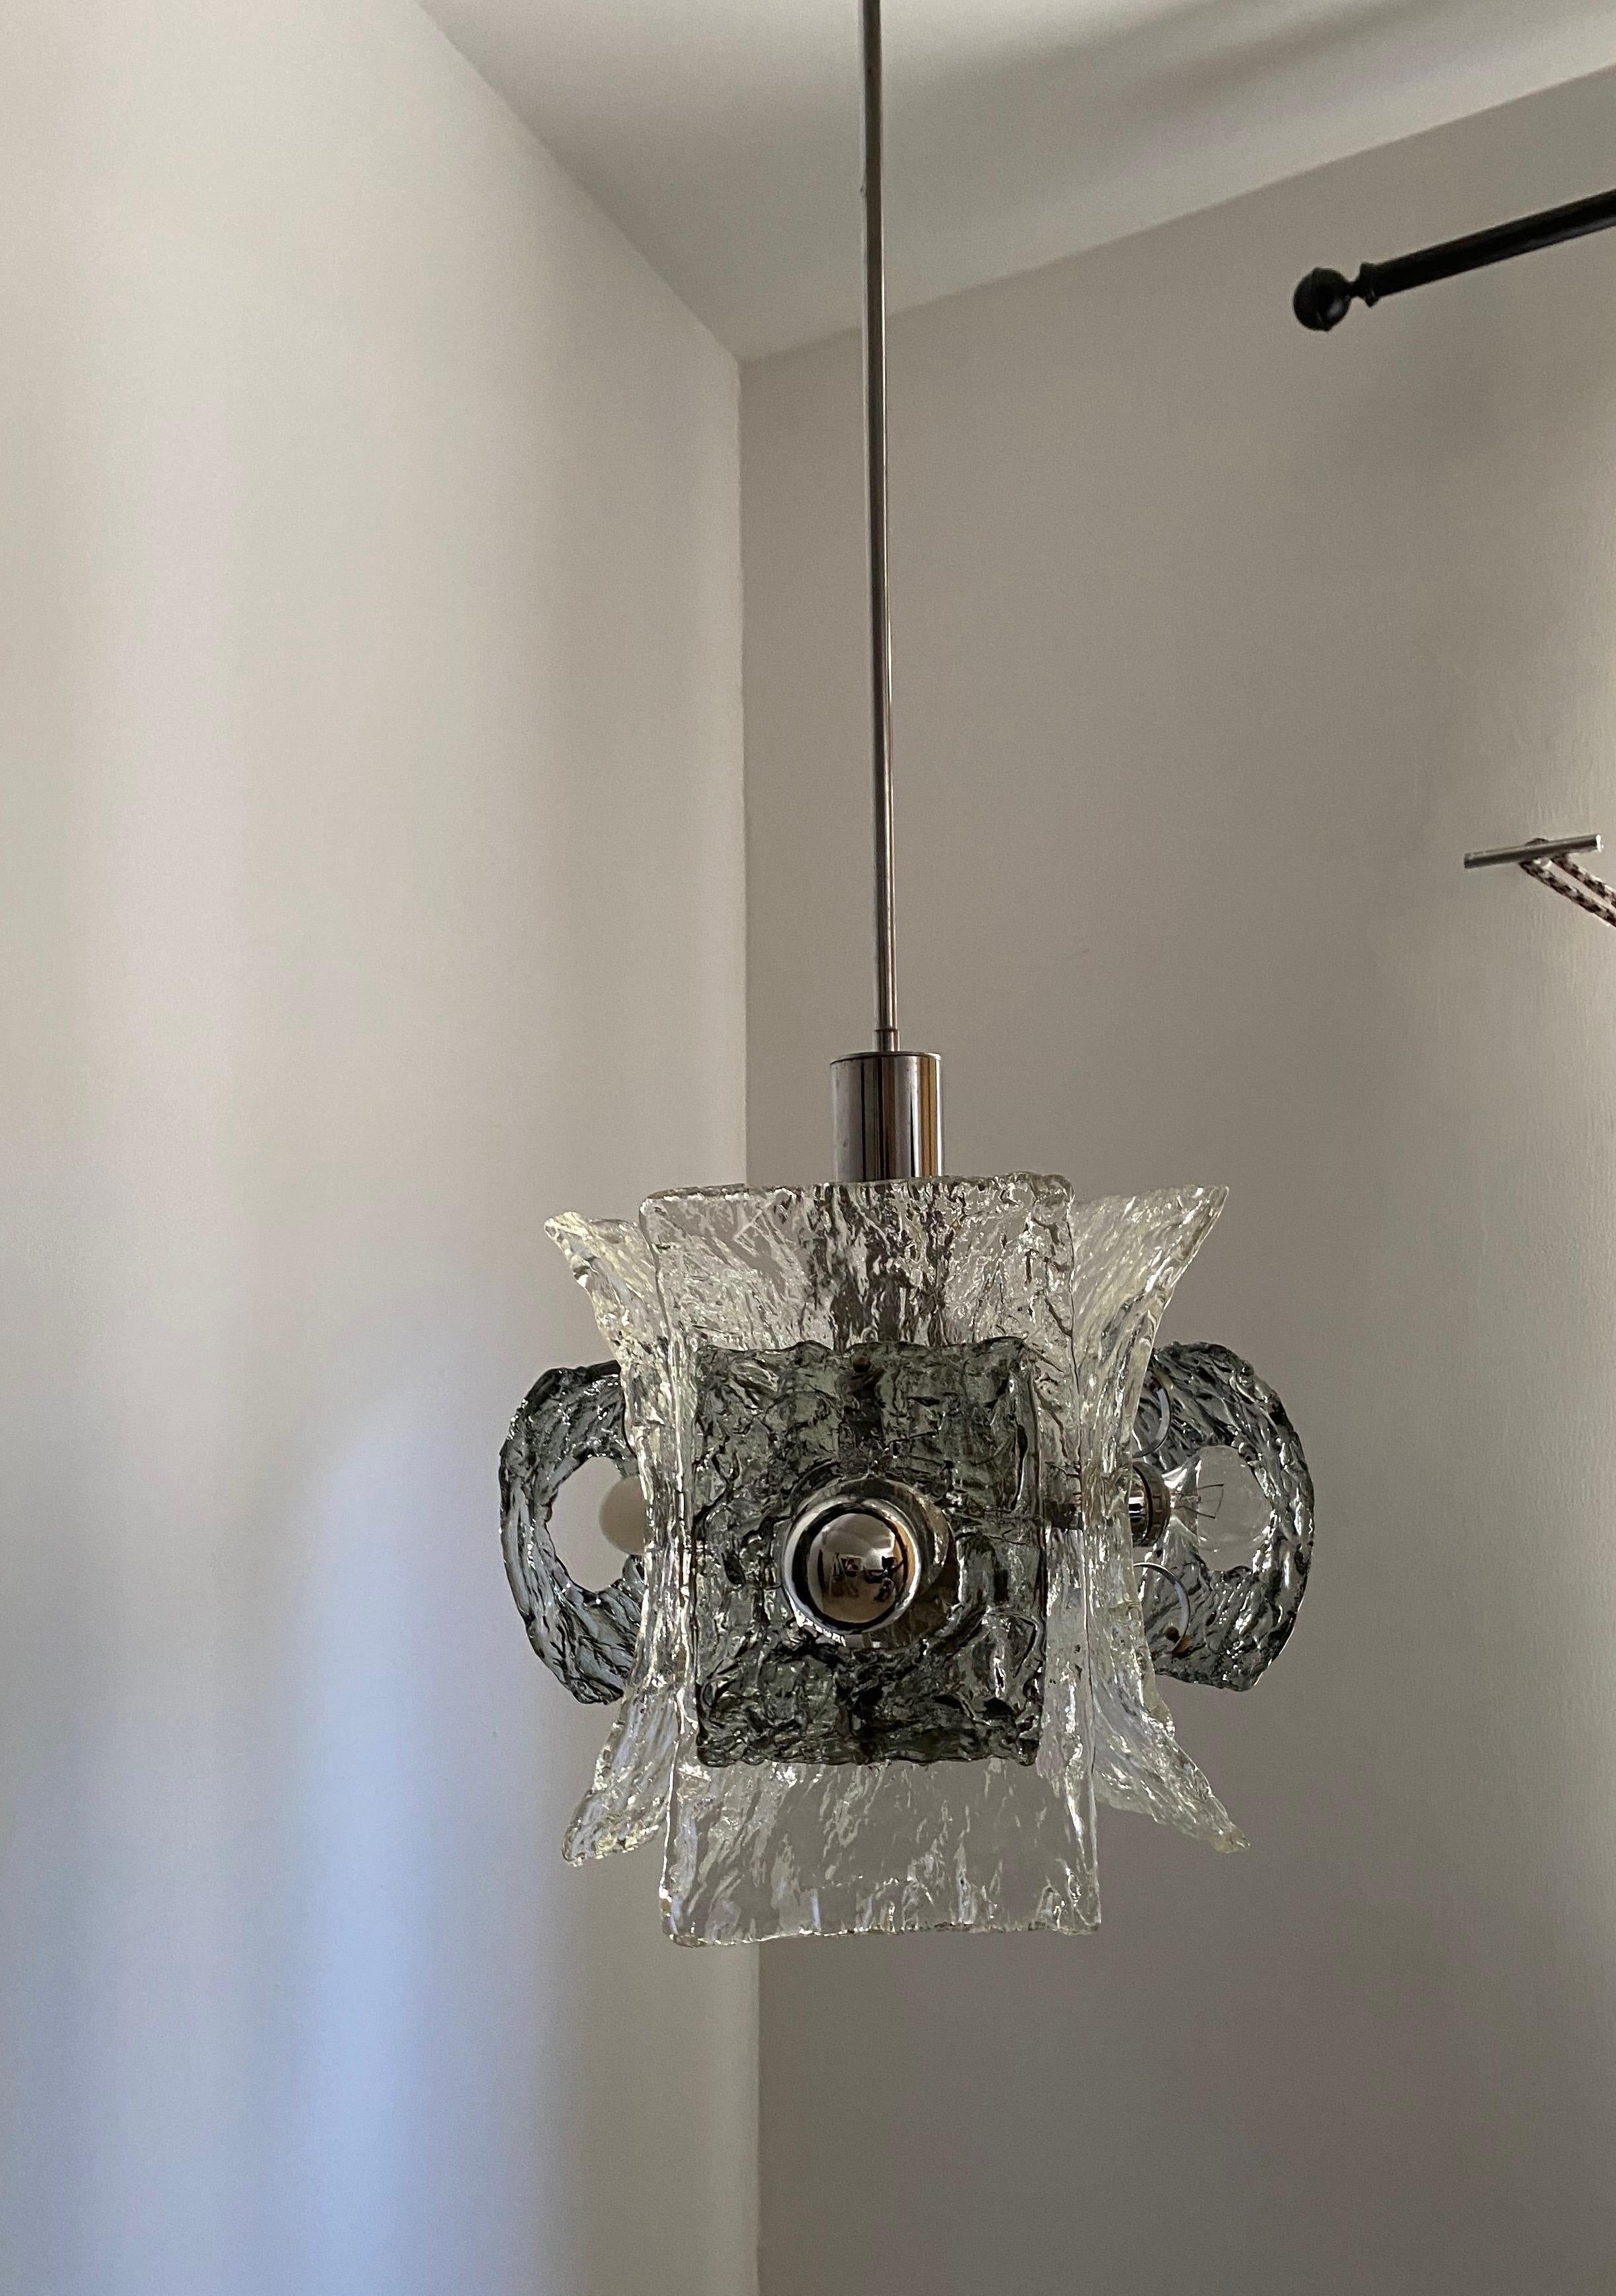 Late 20th Century Mid-Century Modern Chandelier by Mazzega in Murano Glass, Circa 1970 For Sale